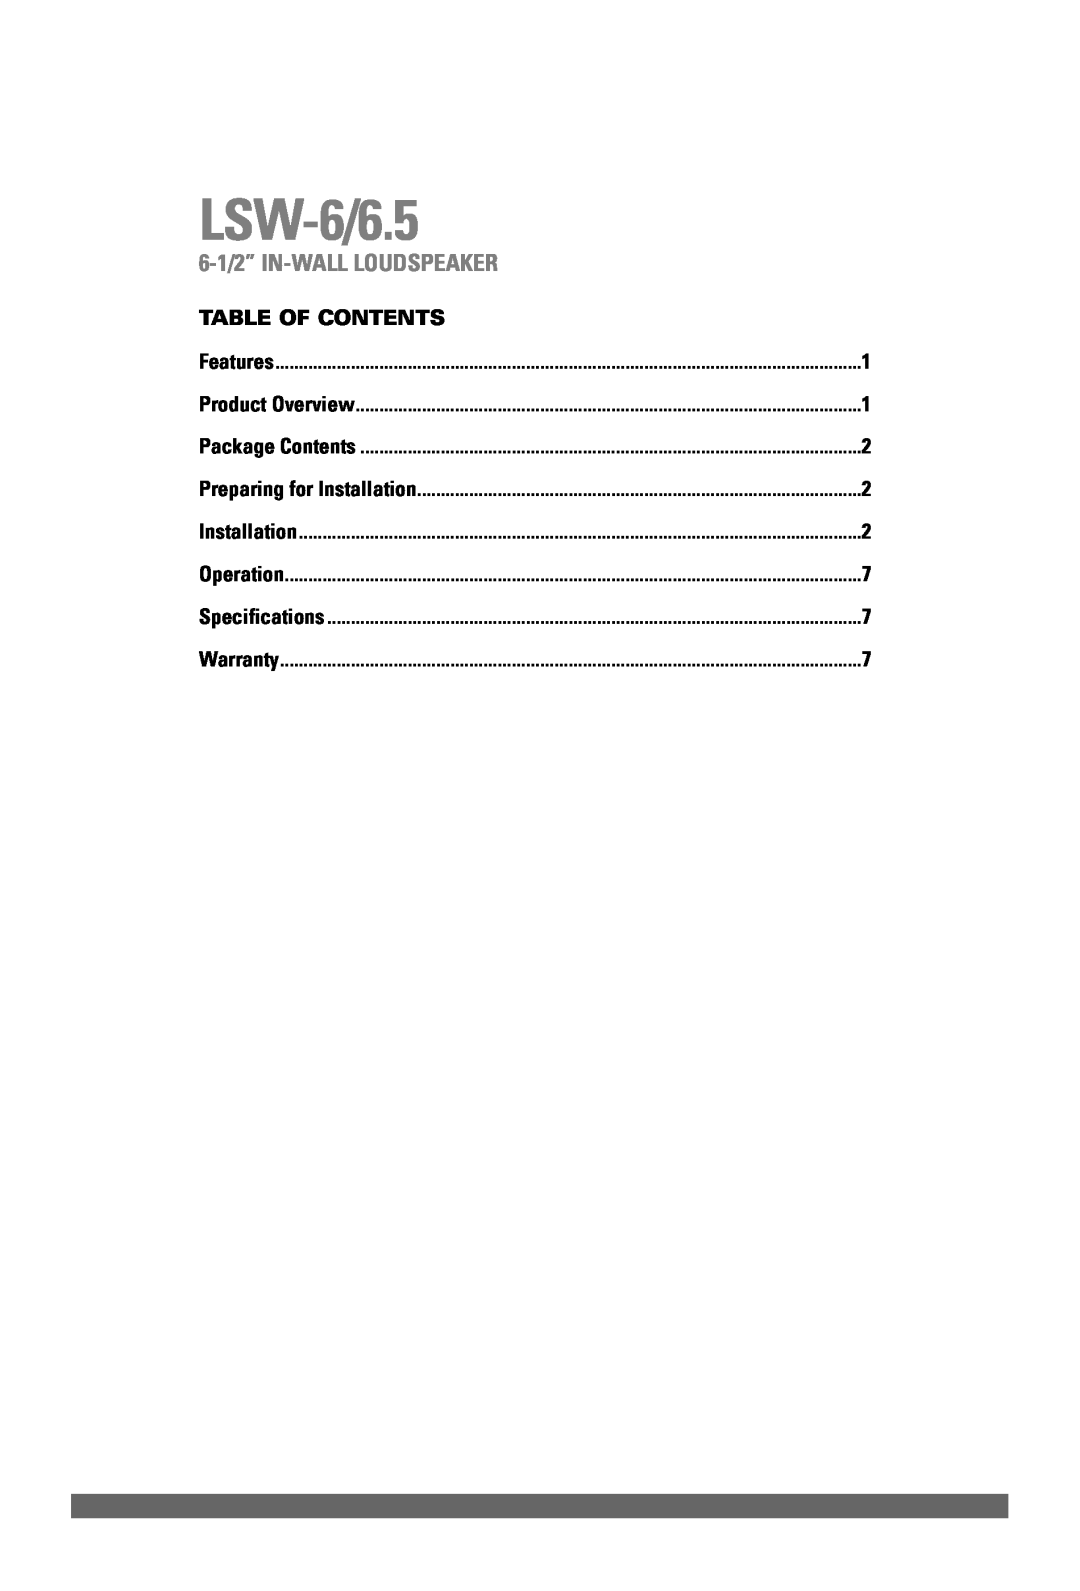 JobSite Systems Table Of Contents, LSW-6/6.5, 6-1/2” IN-WALLLOUDSPEAKER, Features, Product Overview, Package Contents 